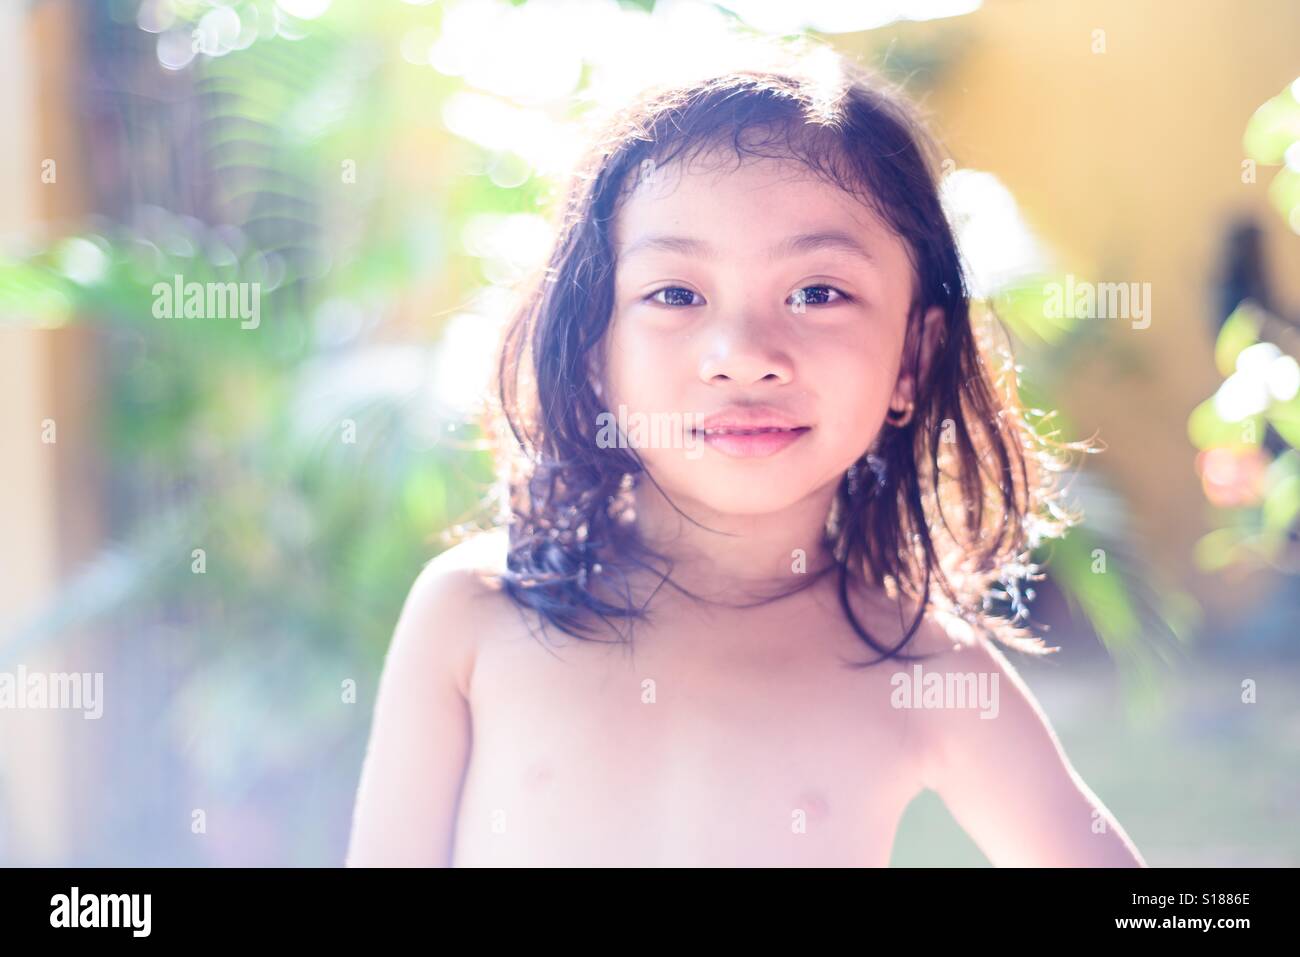 Young girl doing a pose at the garden Stock Photo